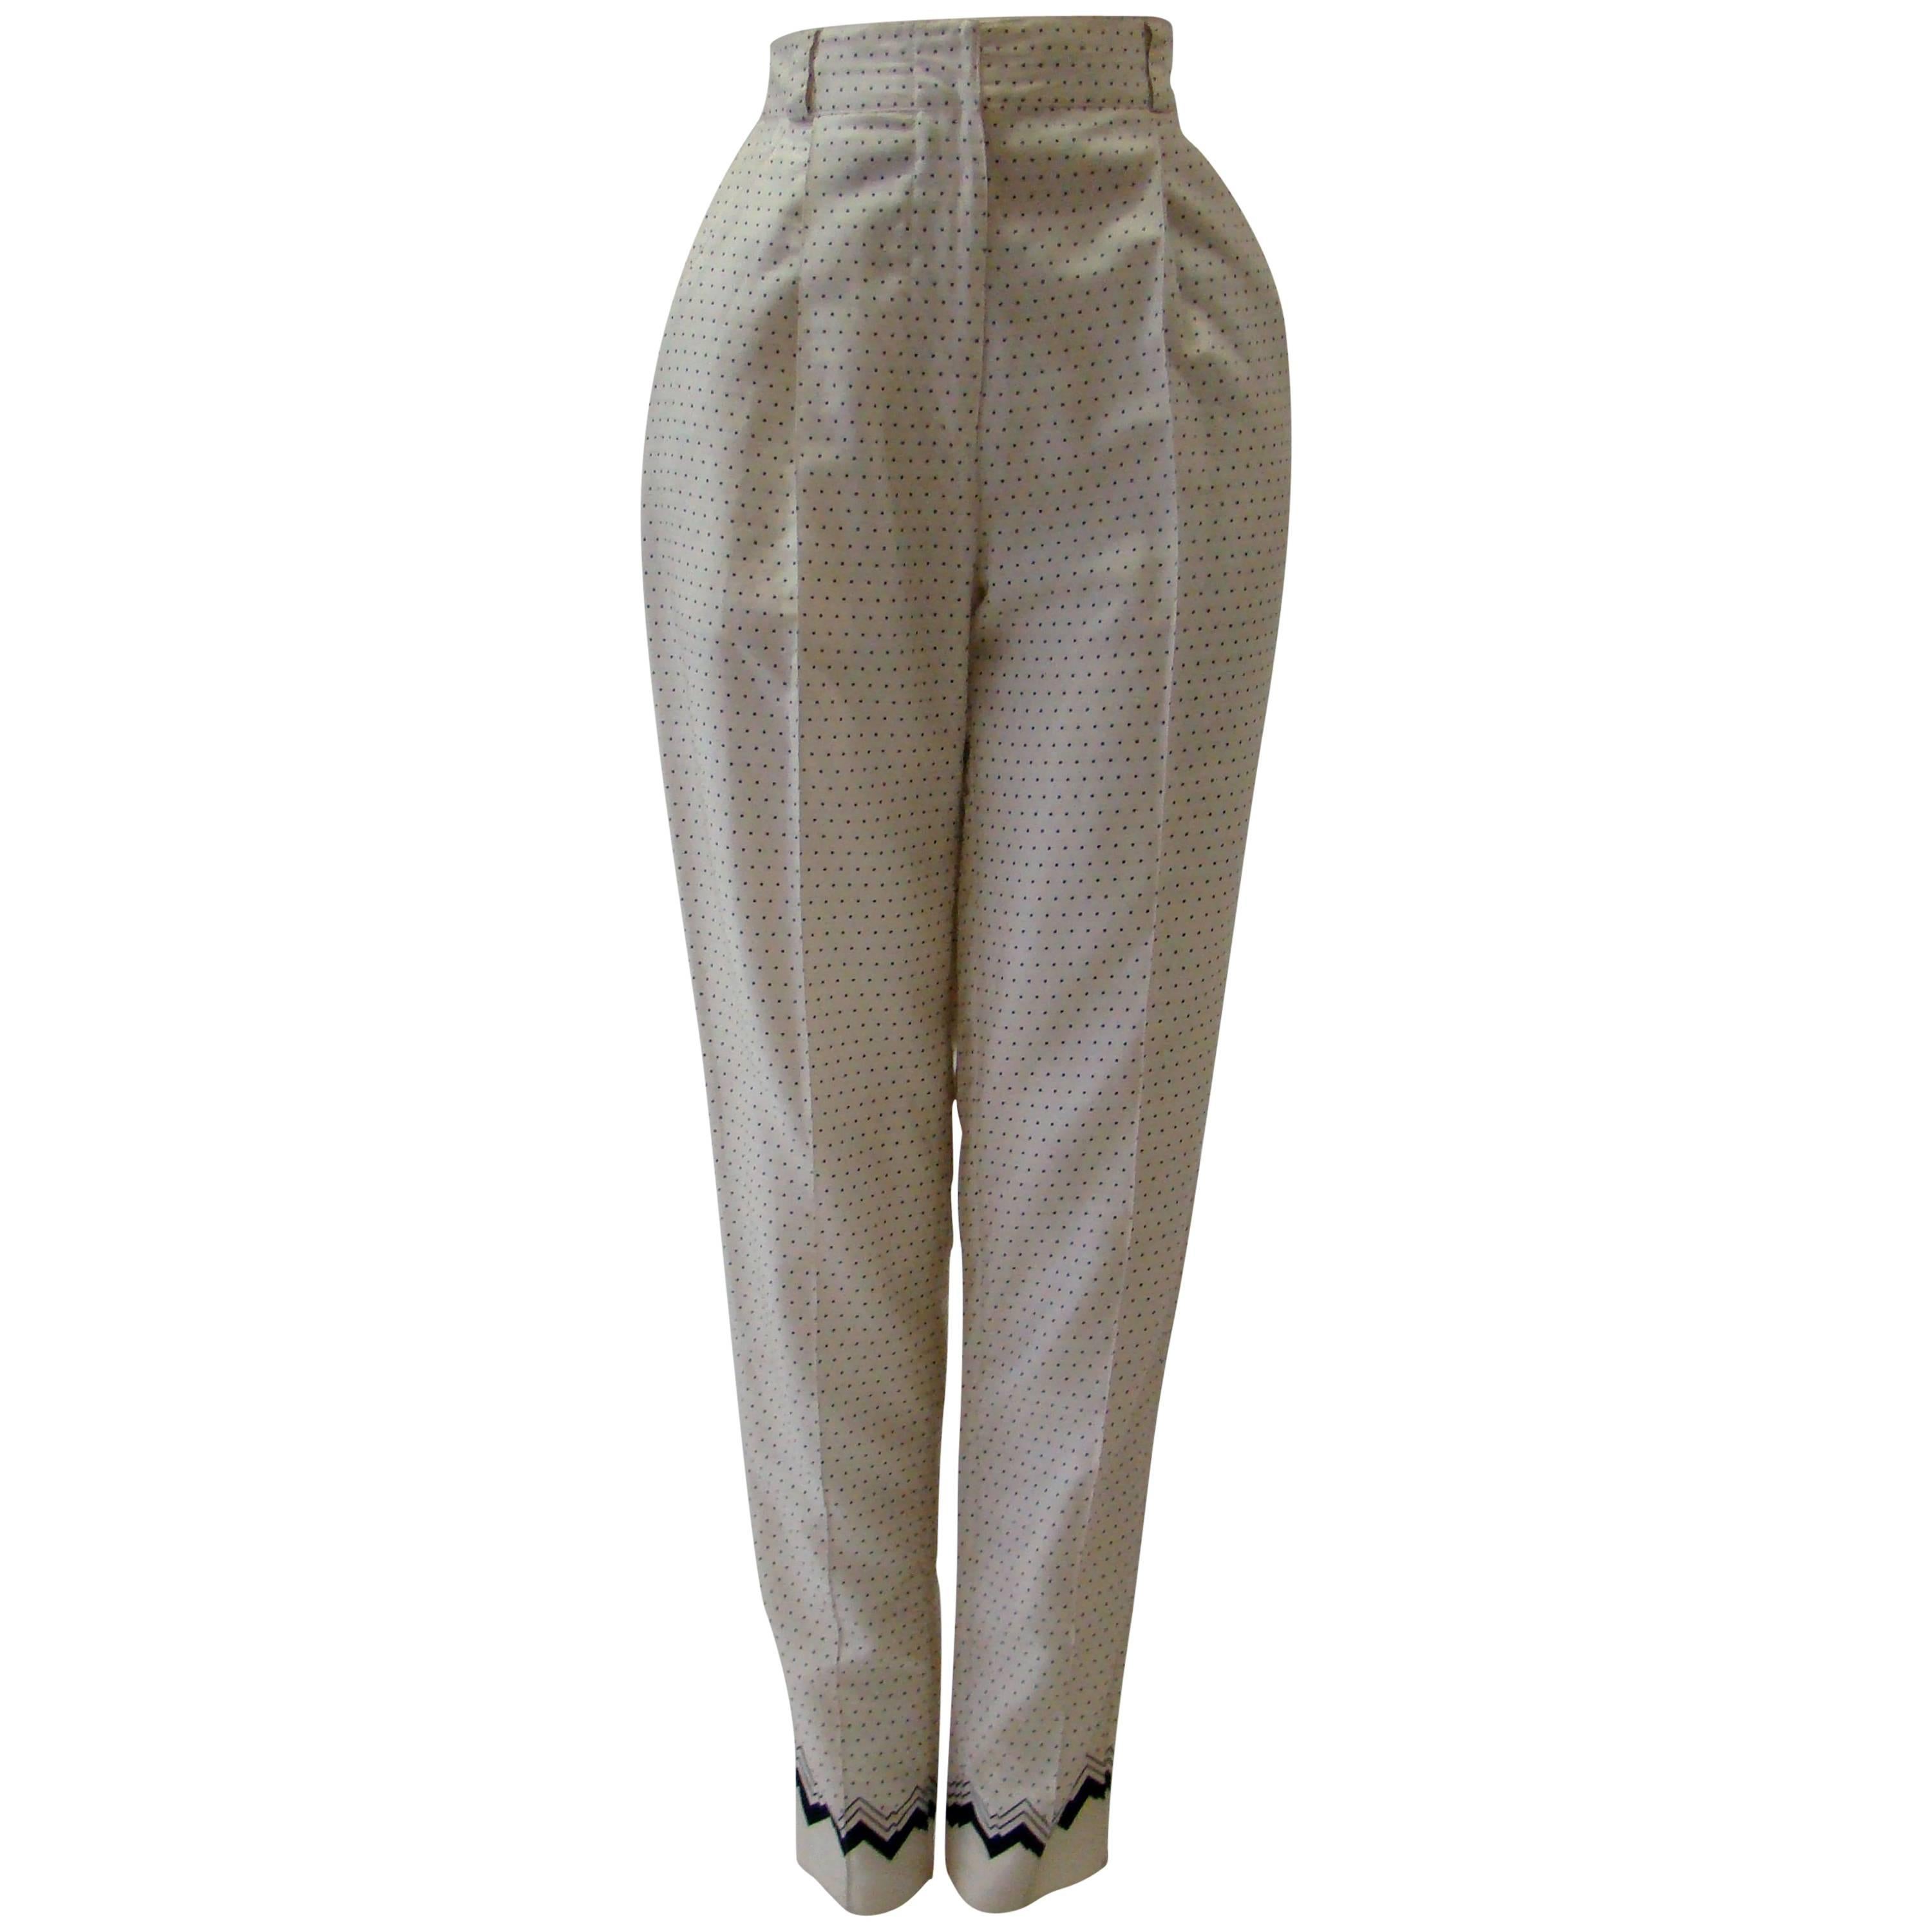 Early Gianni Versace Polka Dot Cotton Pants Spring 1988 For Sale